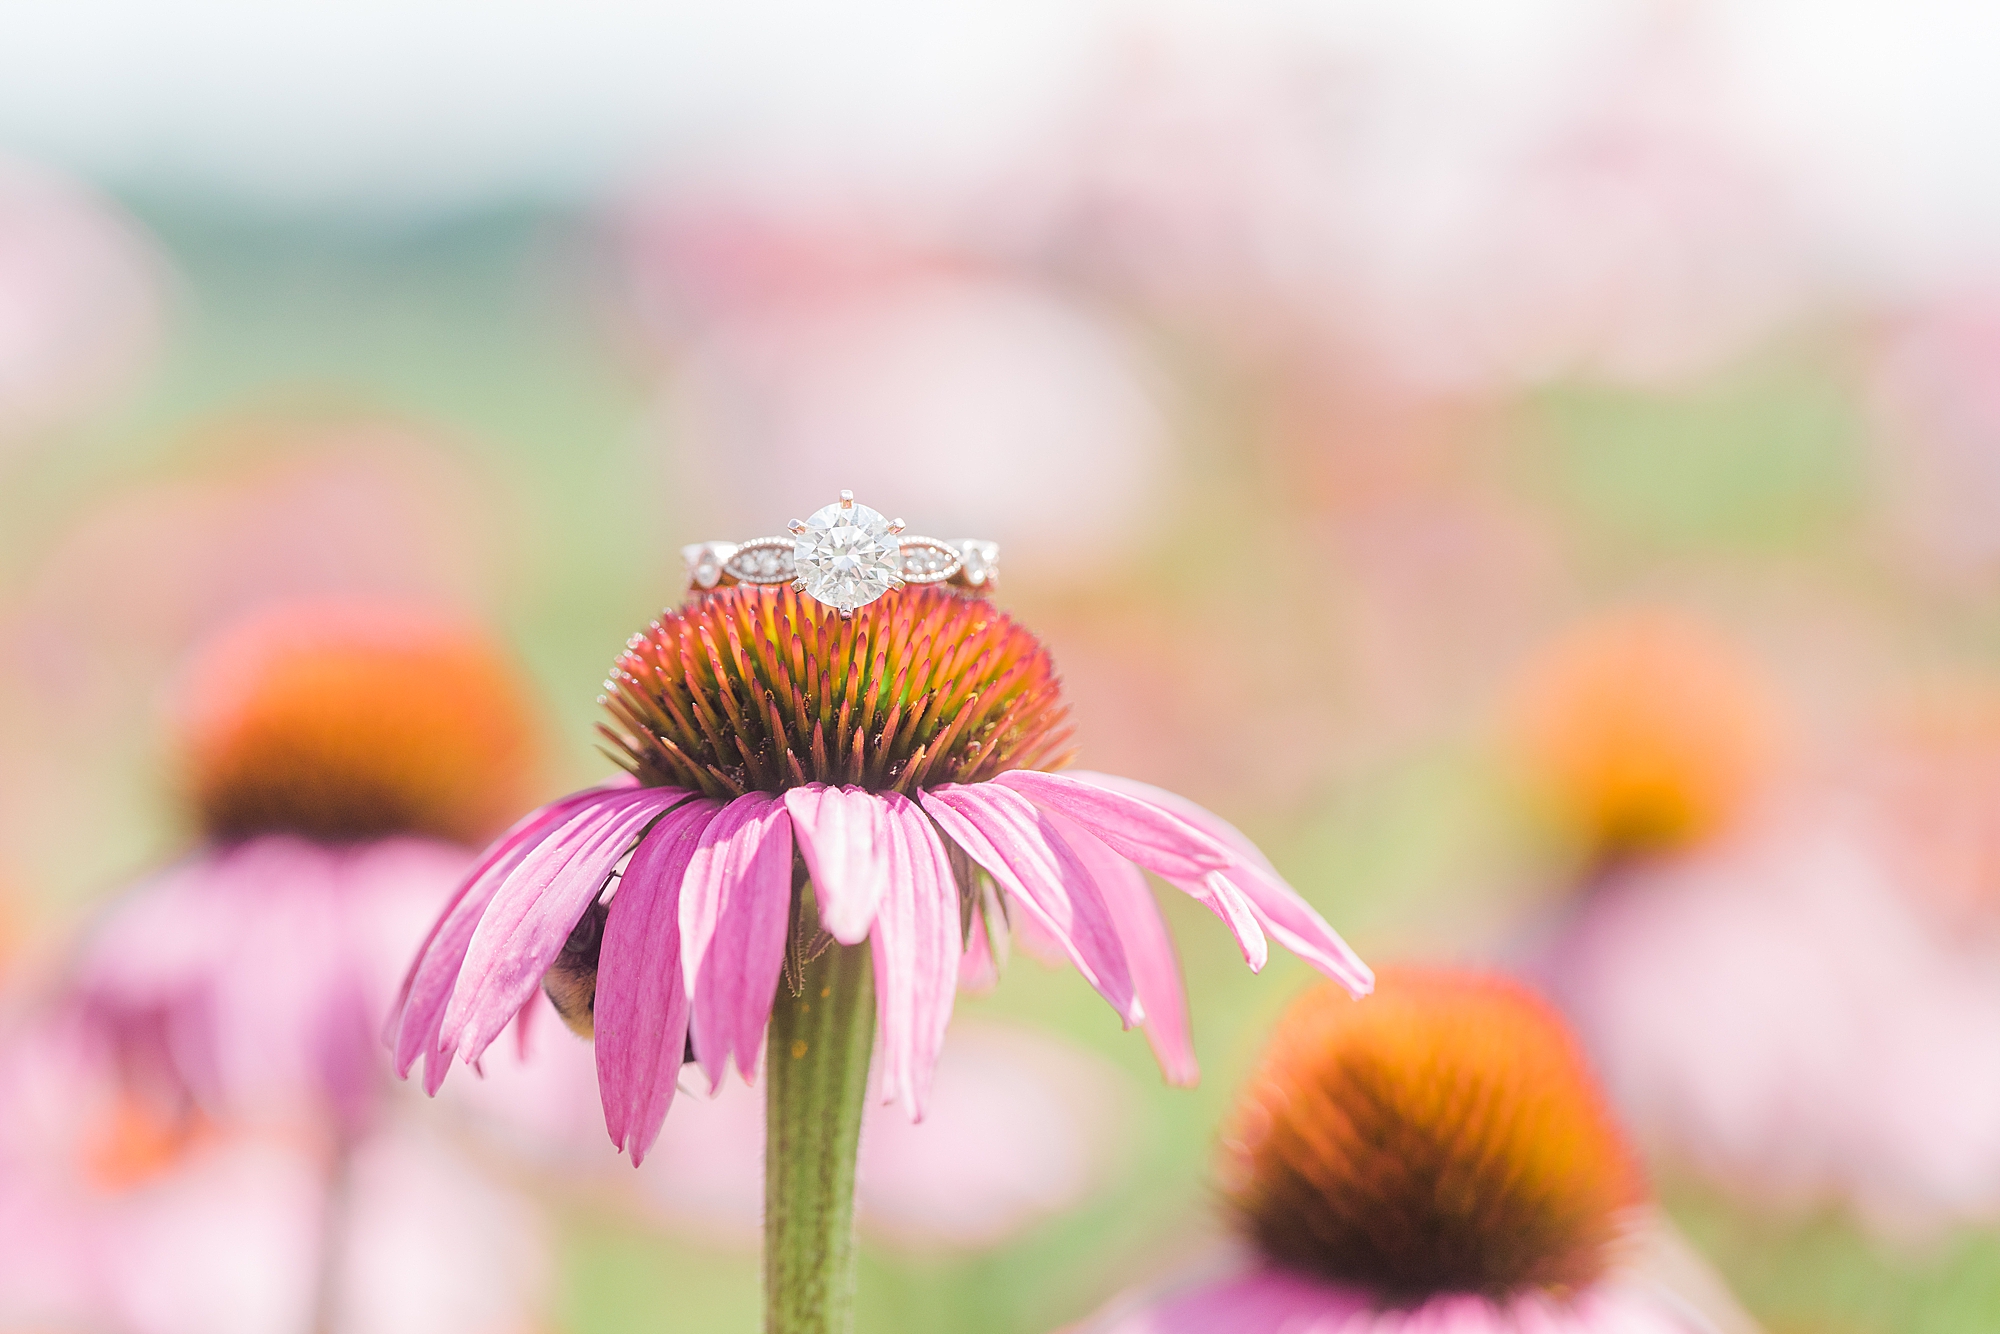 Ring sitting on top of pink flower.